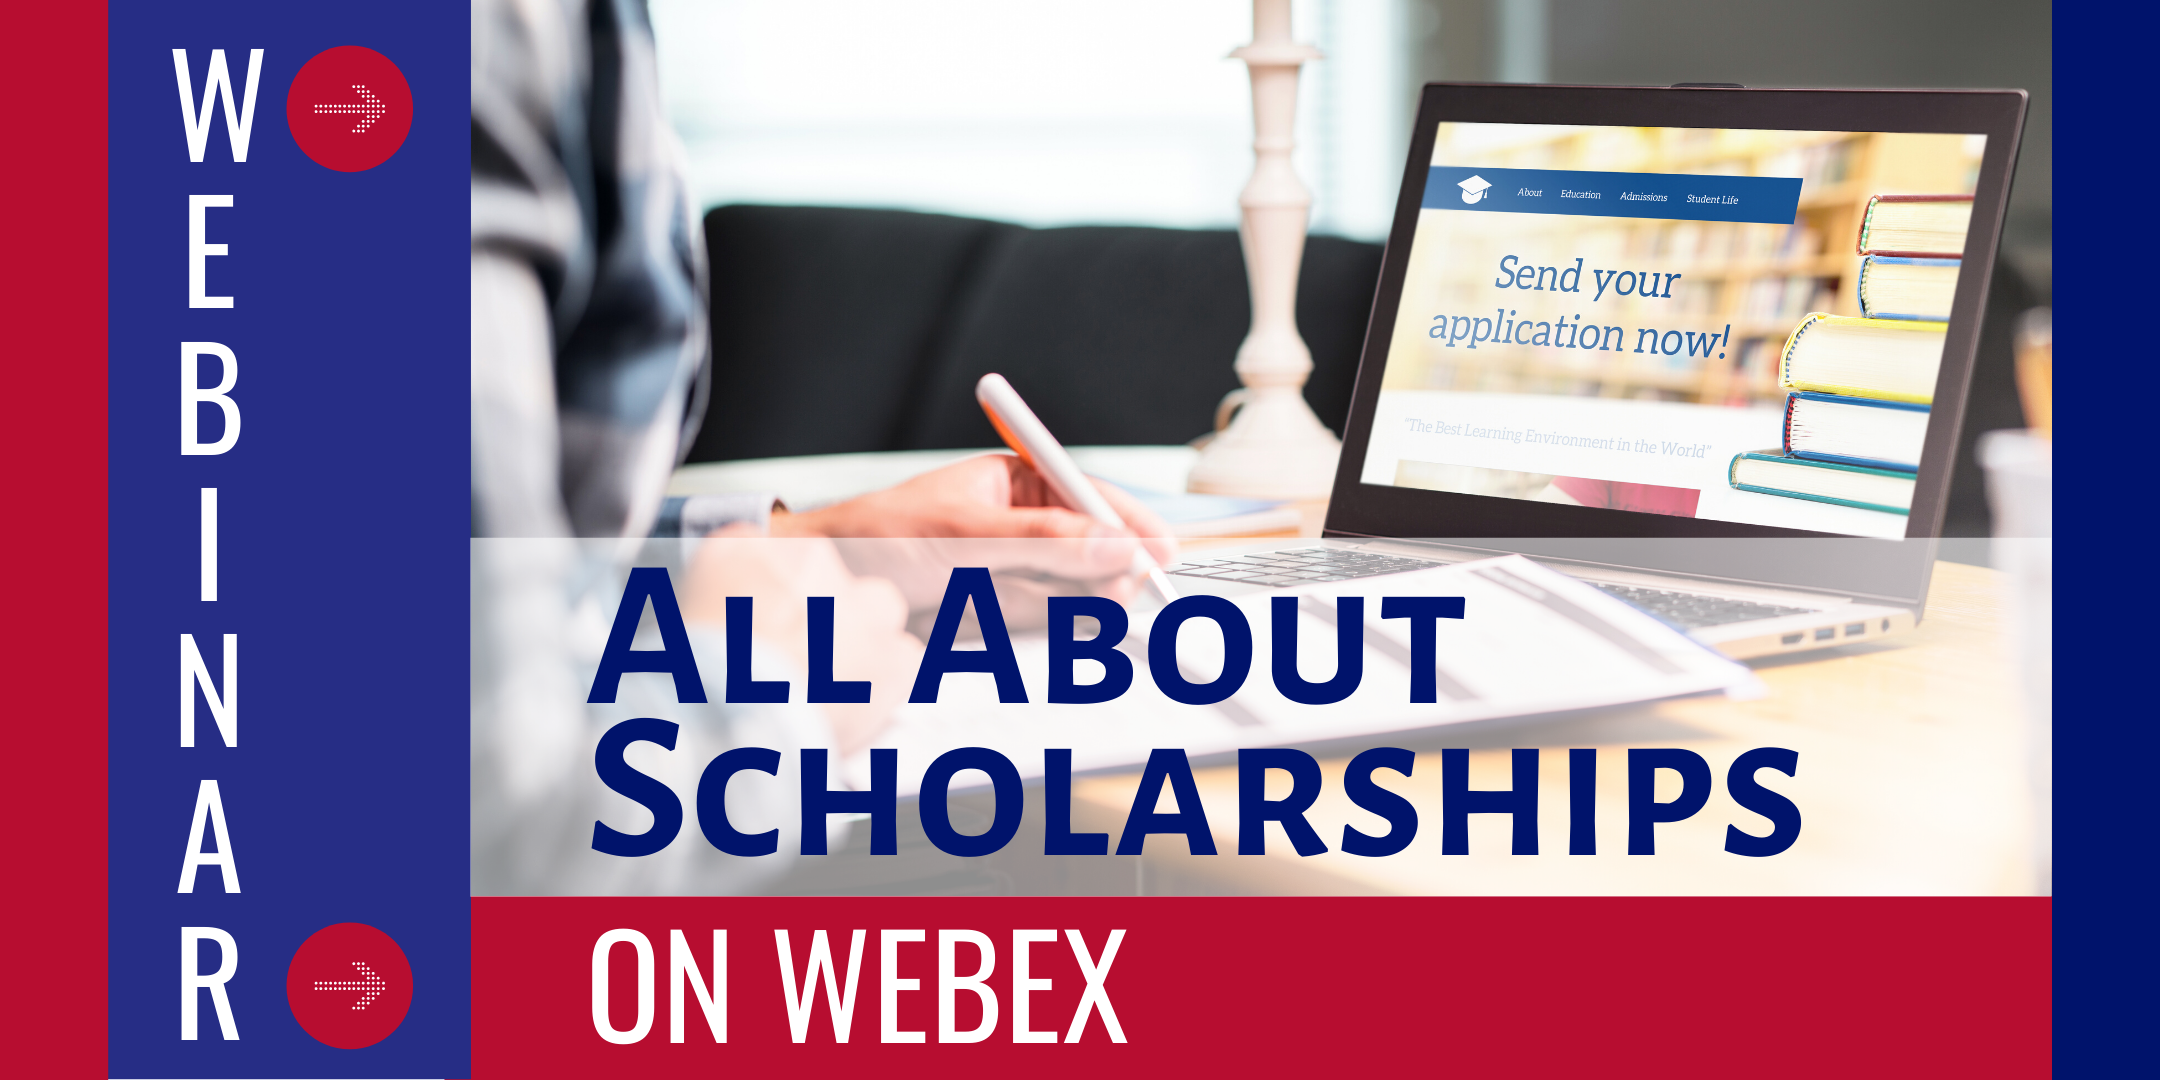 All About Scholarships Webinar on WebEx